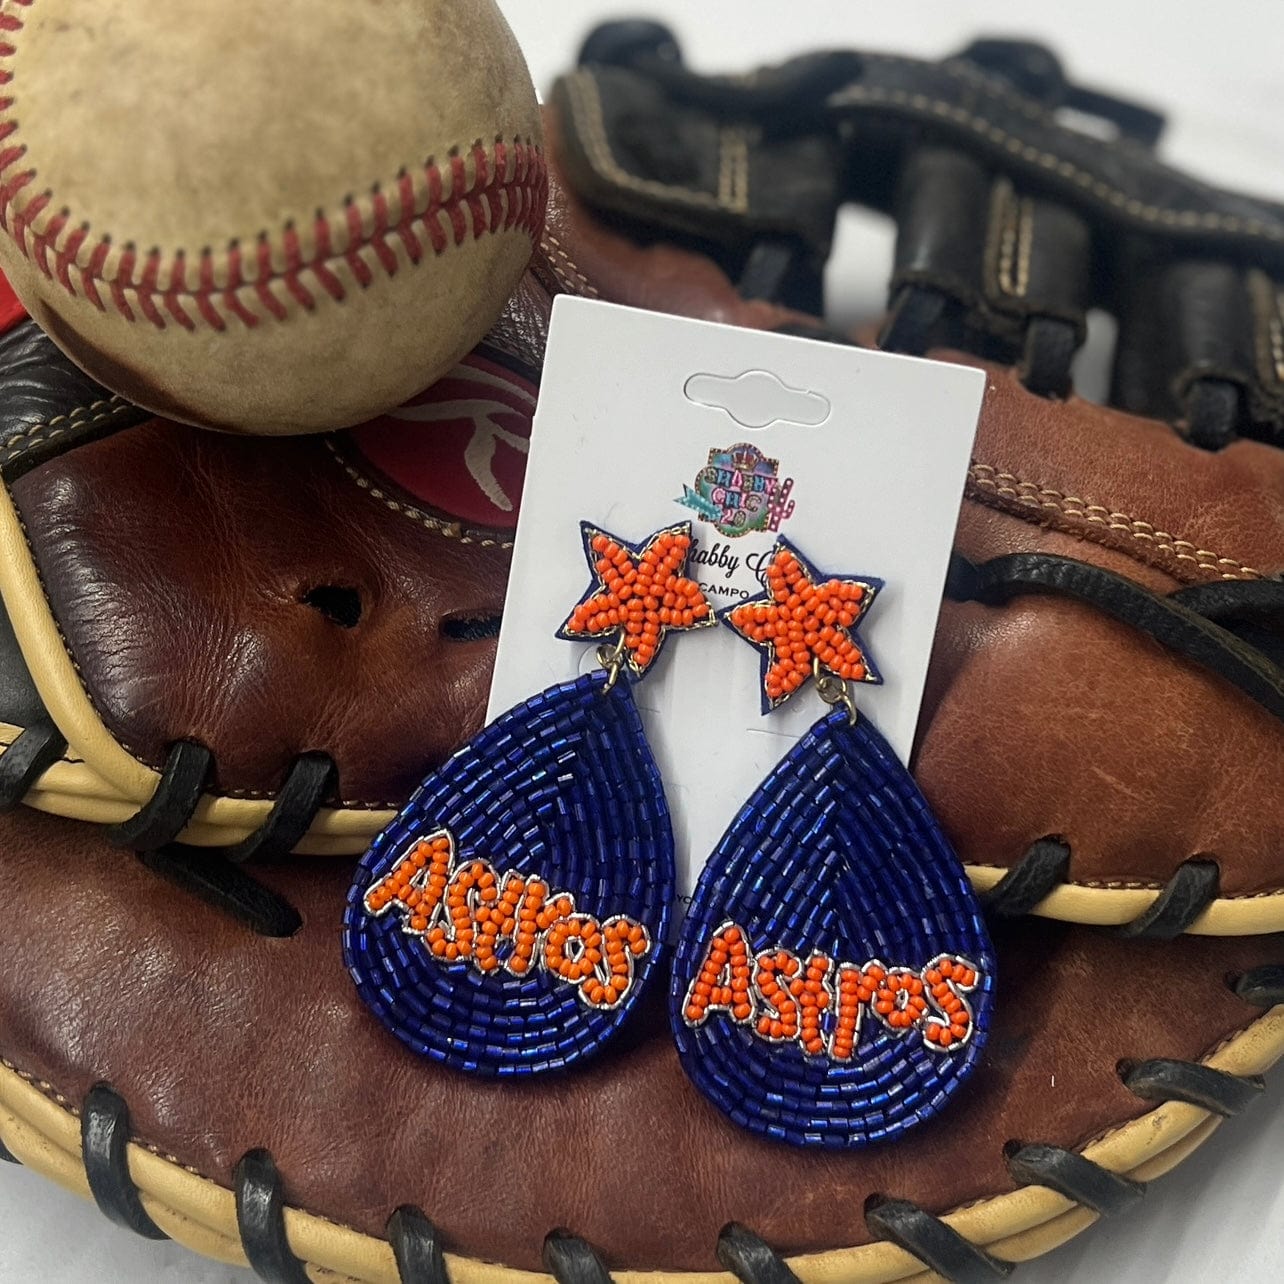 Baseball Team Earrings Shabby Chic Boutique and Tanning Salon Blue Beaded